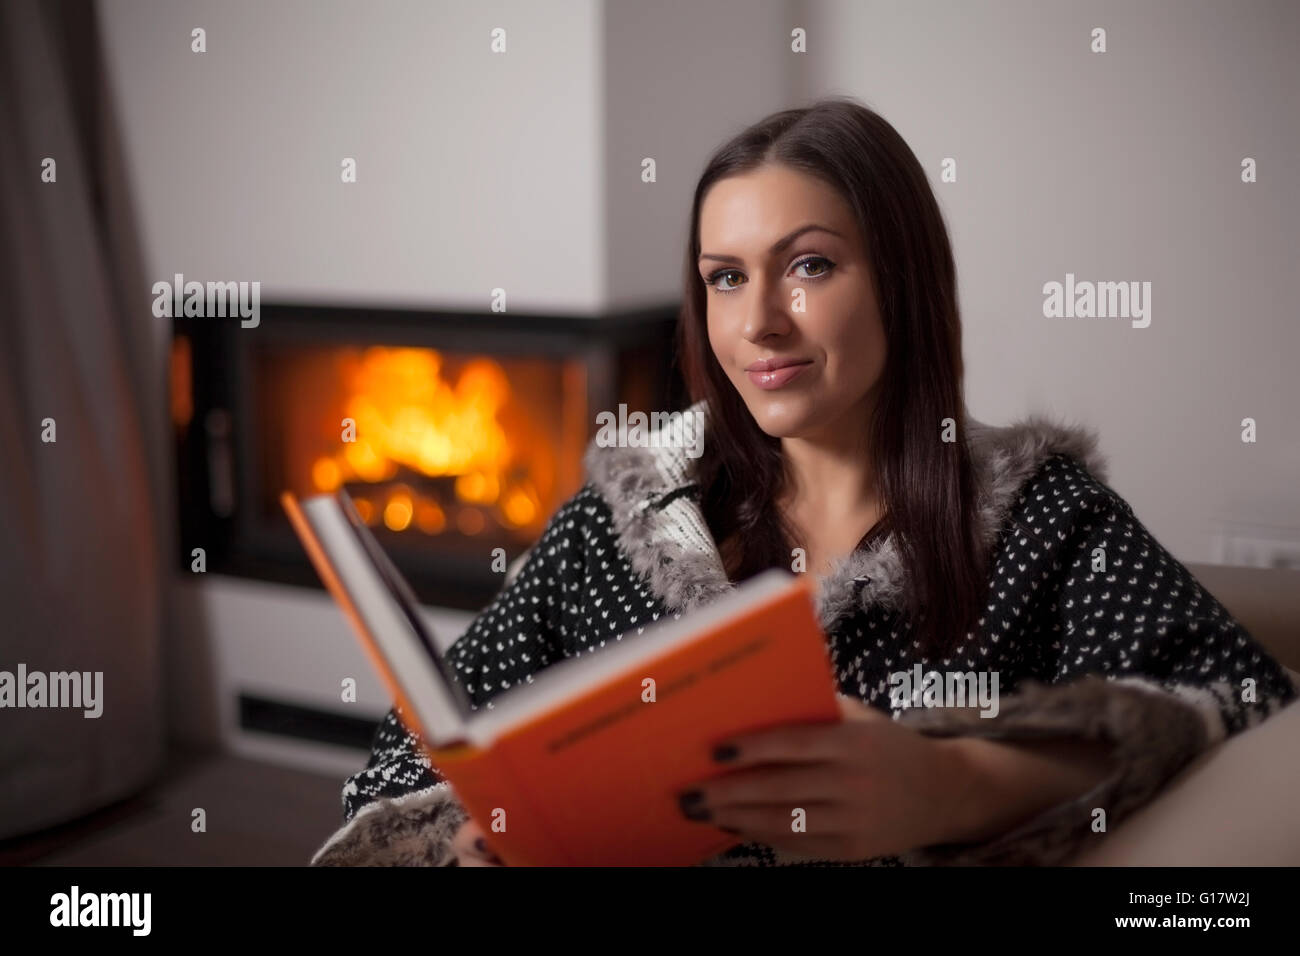 Portrait of beautiful woman reading book by fireplace Stock Photo